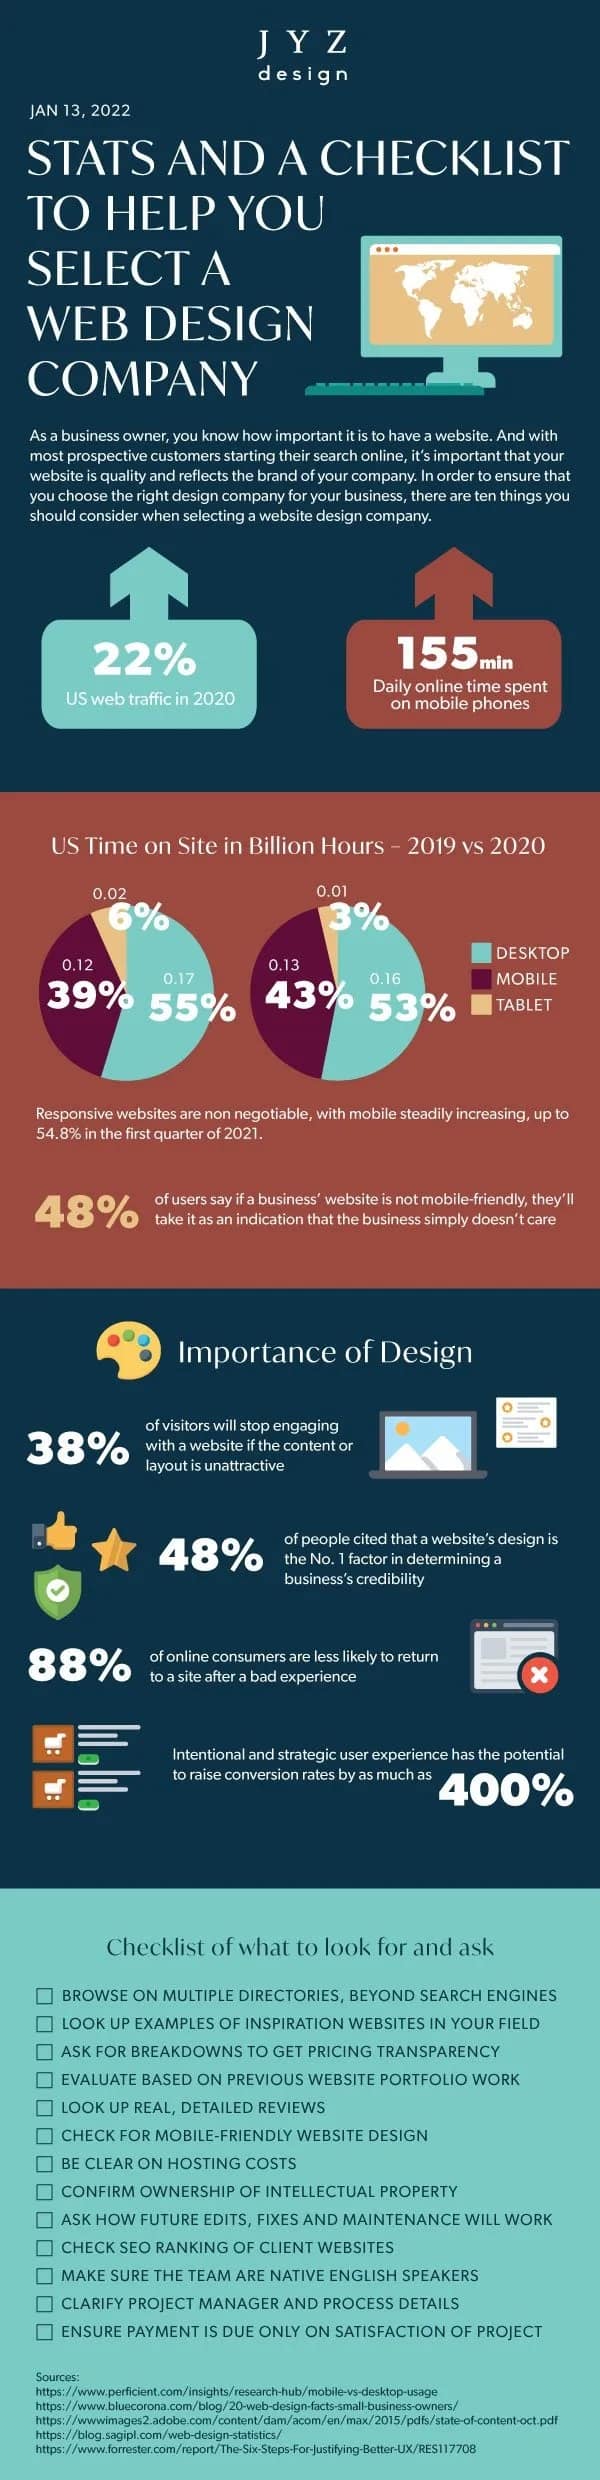 Things to Look for When Selecting Your Website Design Company-Infographic